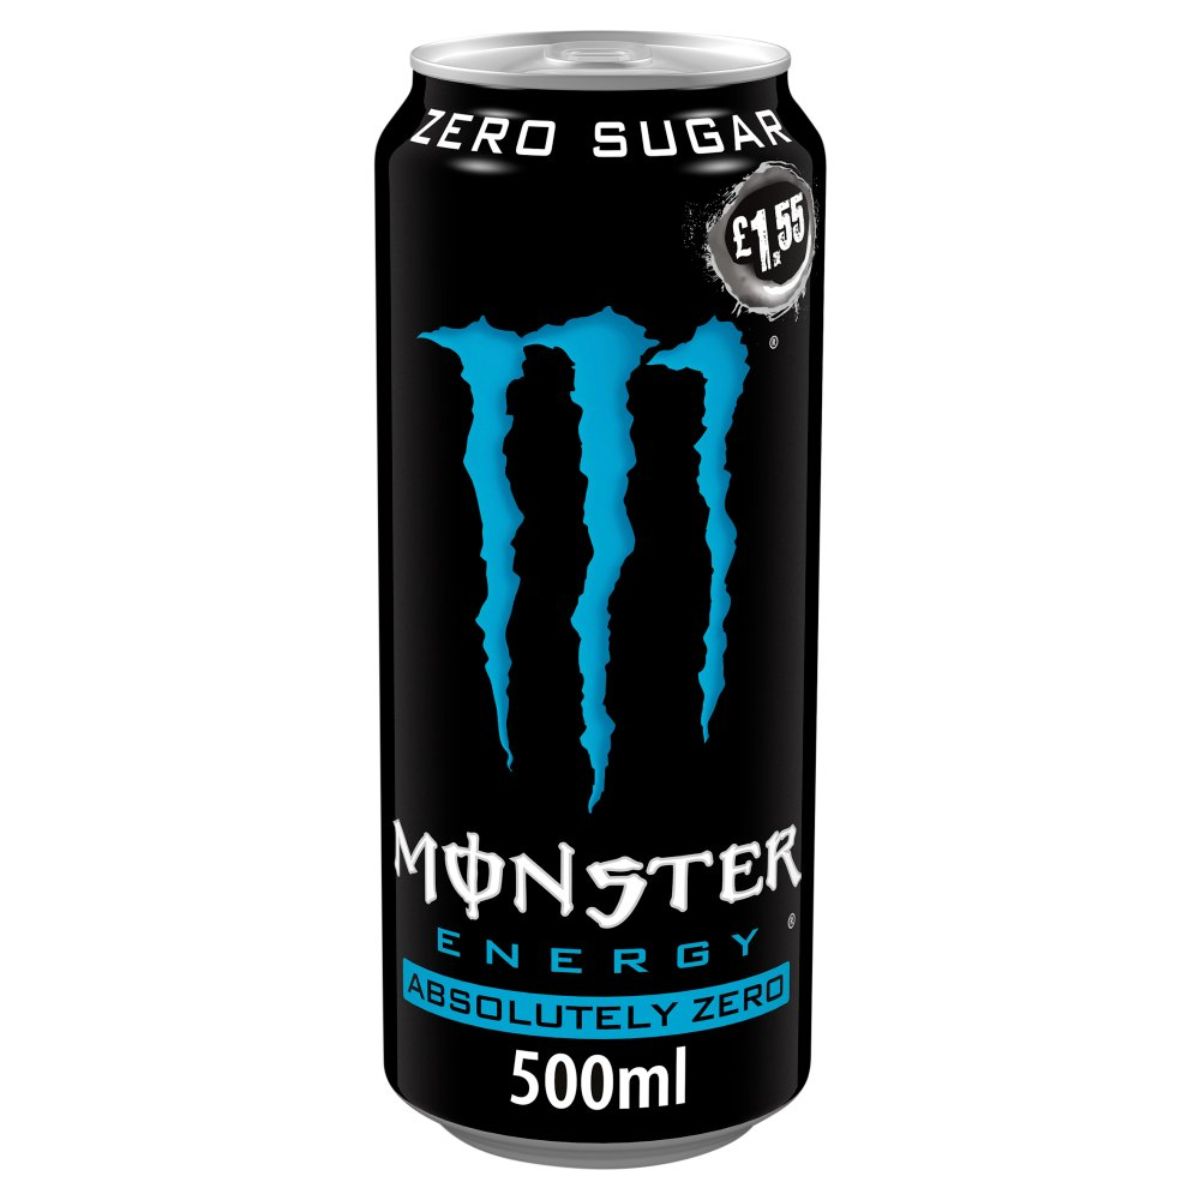 Monster - Energy Drink Absolutely Zero Sugar - 500ml can.